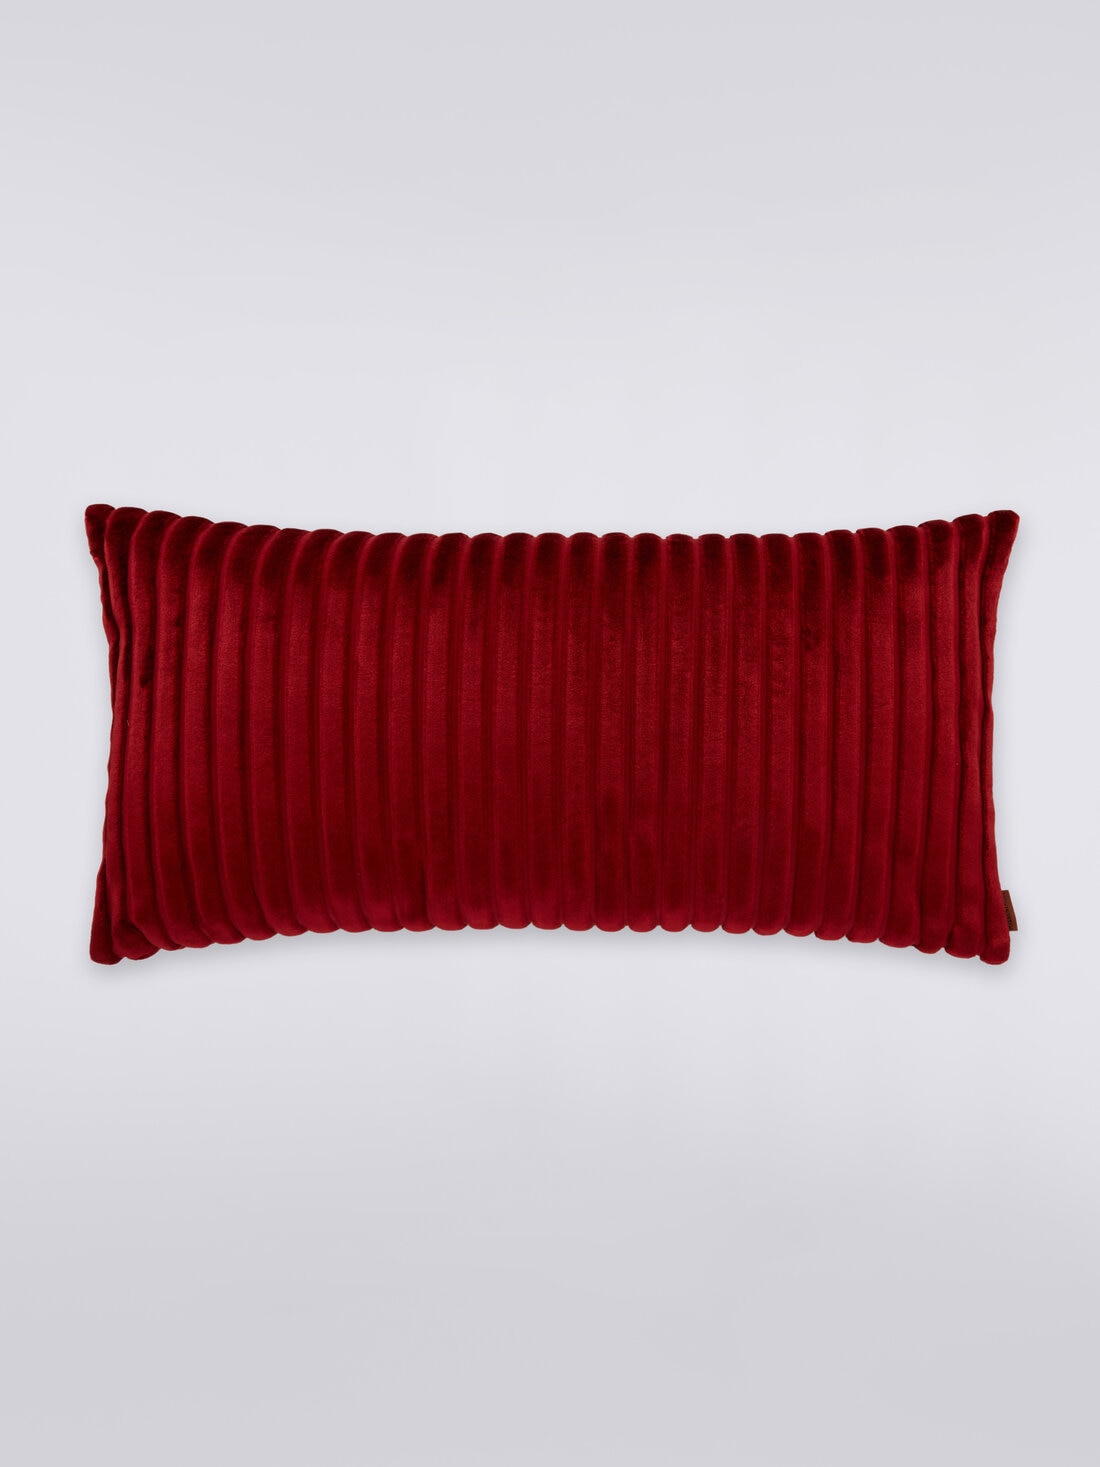 Coomba Coussin 30X60, Rouge  - 8033050074532 - 0